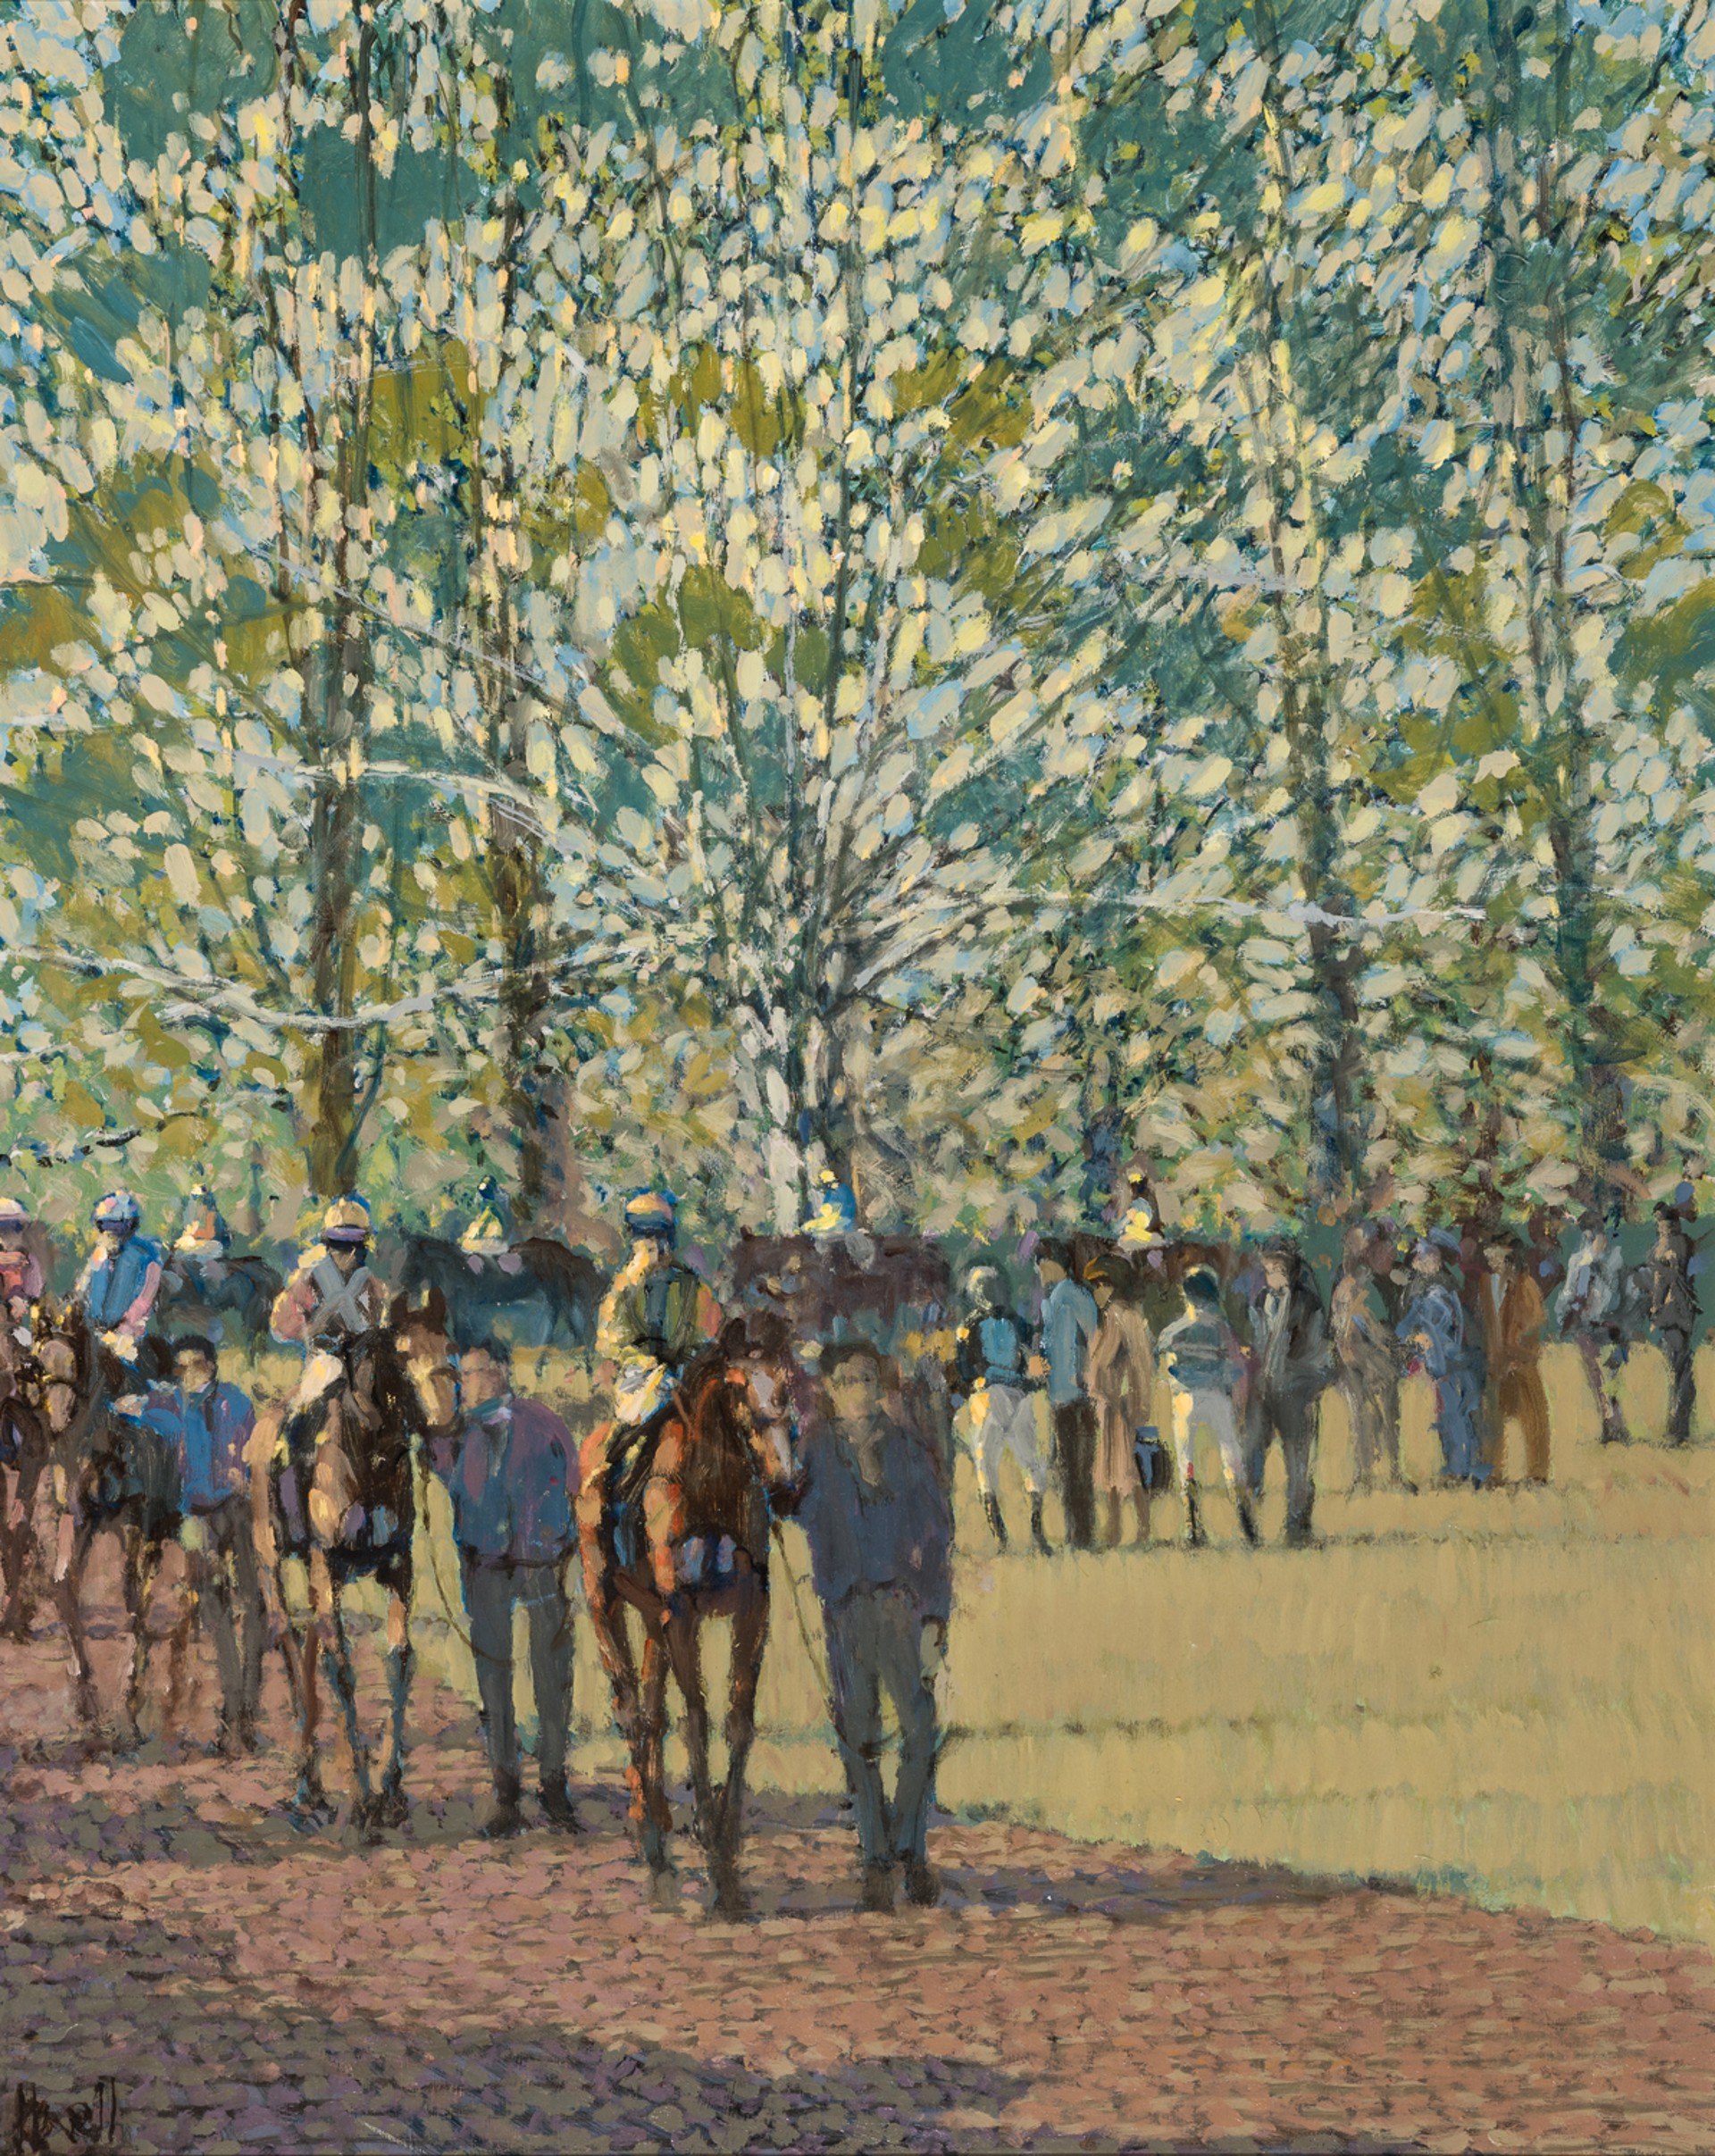 THE PADDOCK, KEENELAND by Peter Howell